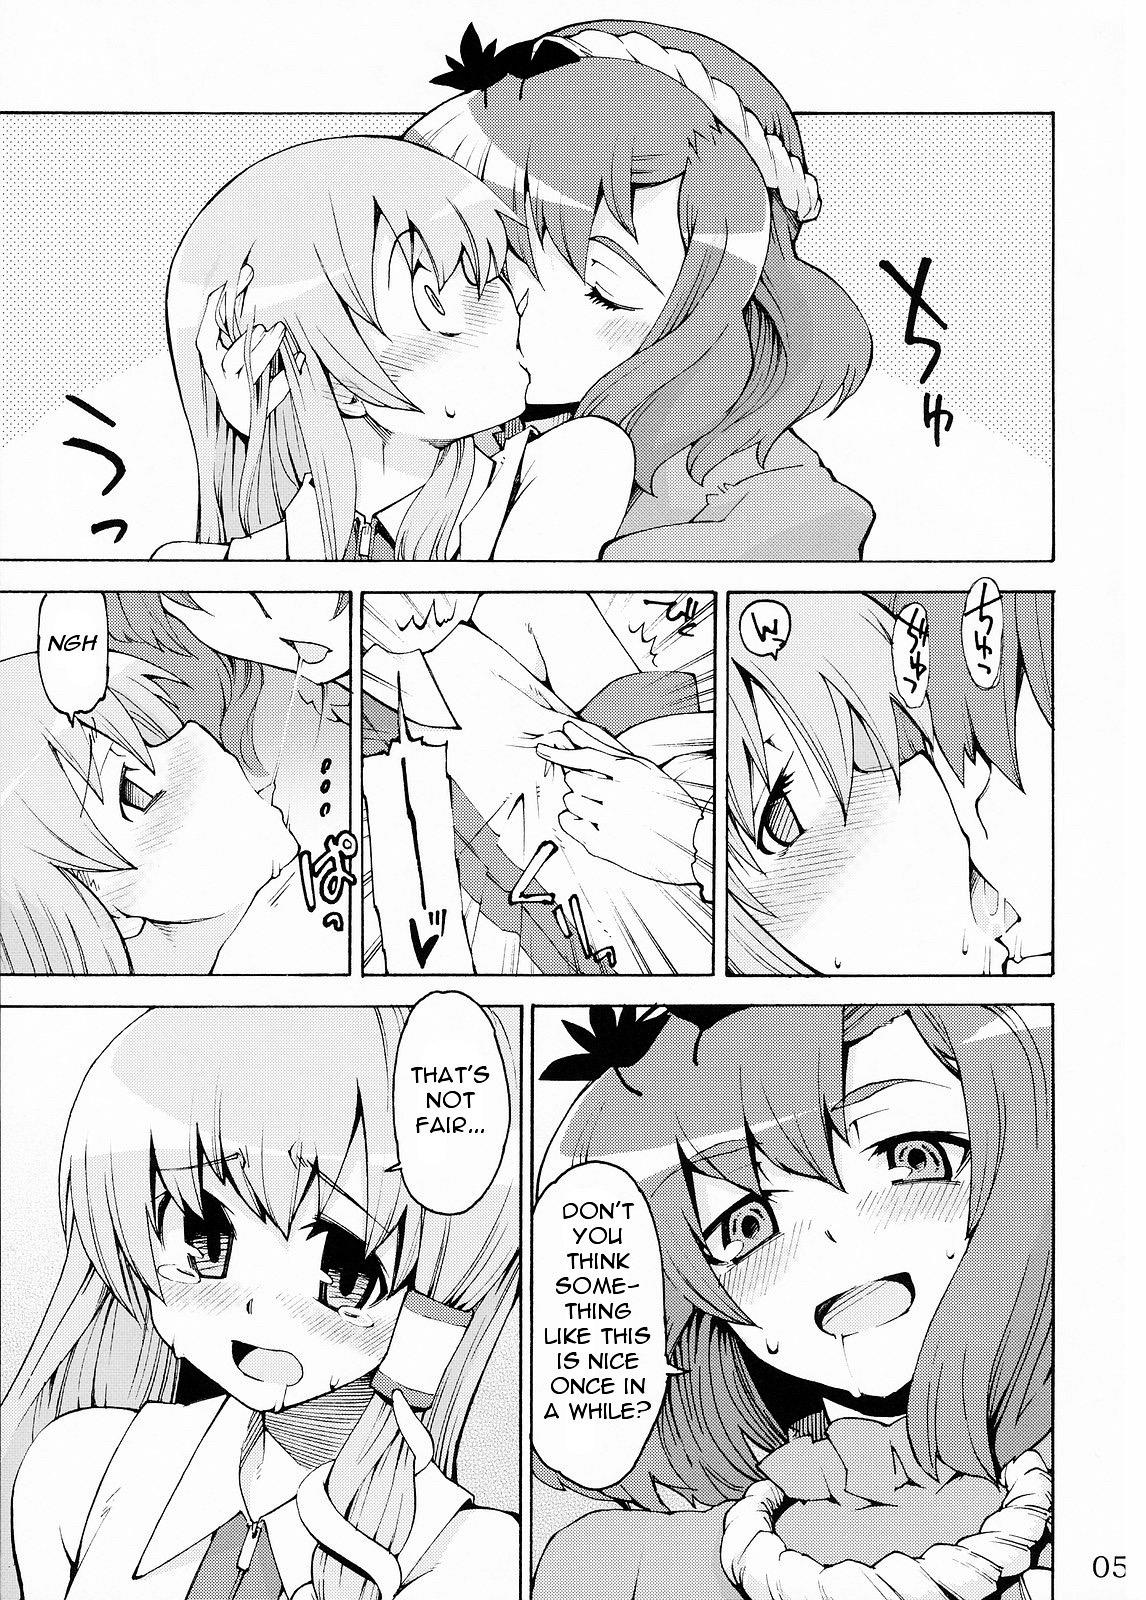 Costume Kami-sama to Issho! Happy every day! - Touhou project Best Blowjob - Page 5